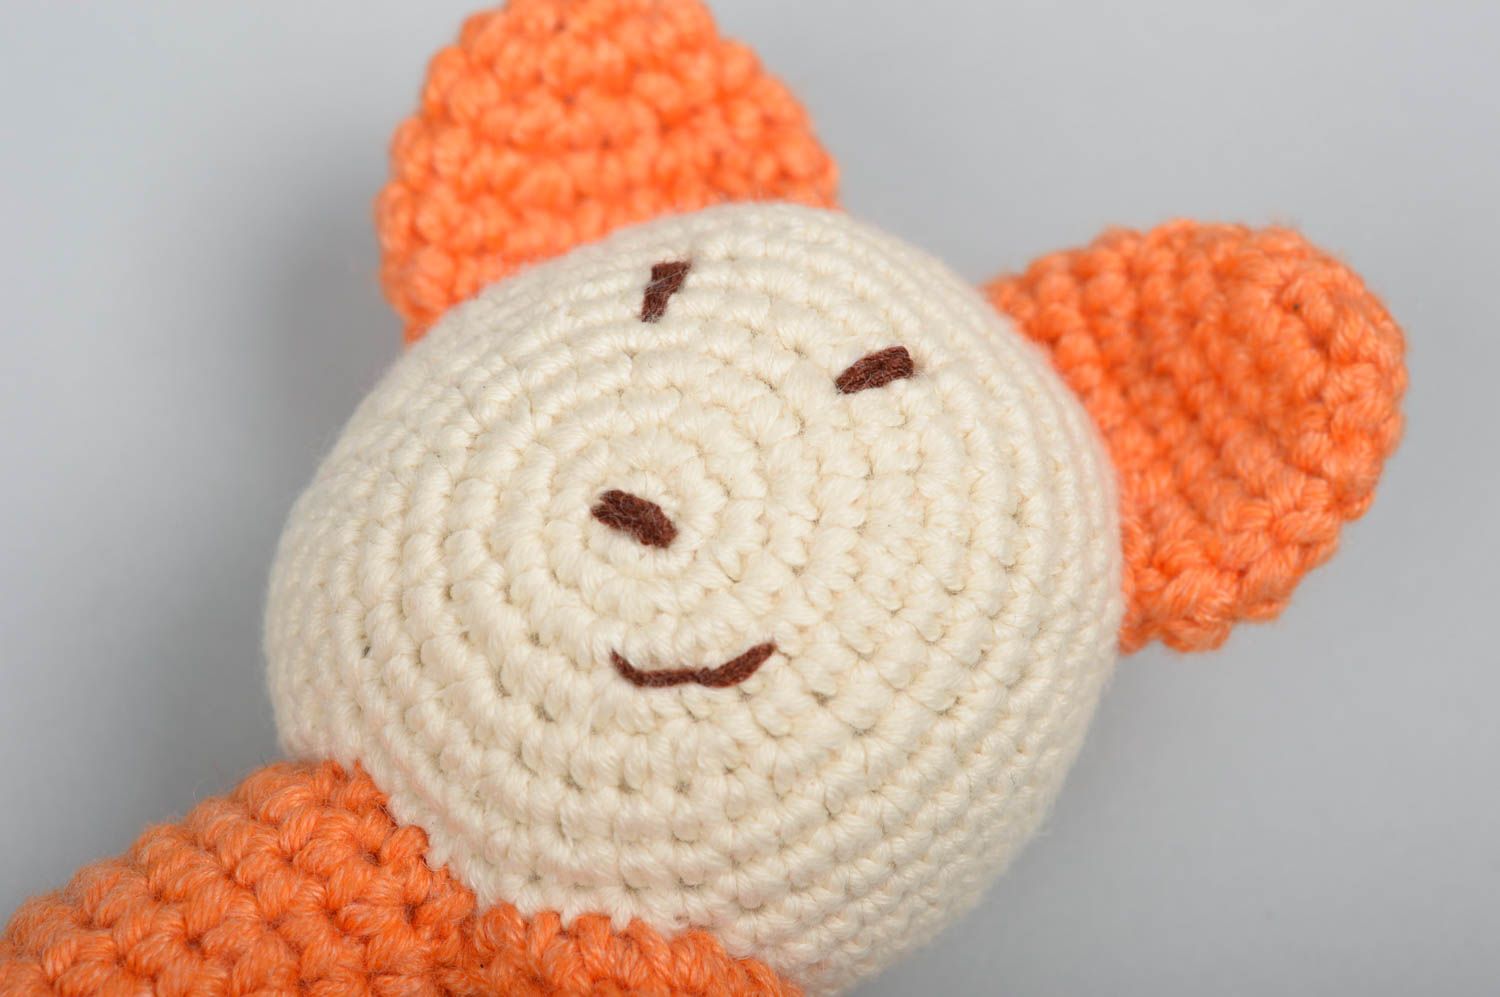 Beautiful handmade crochet toy soft toy for babies stuffed baby toy gift ideas photo 3